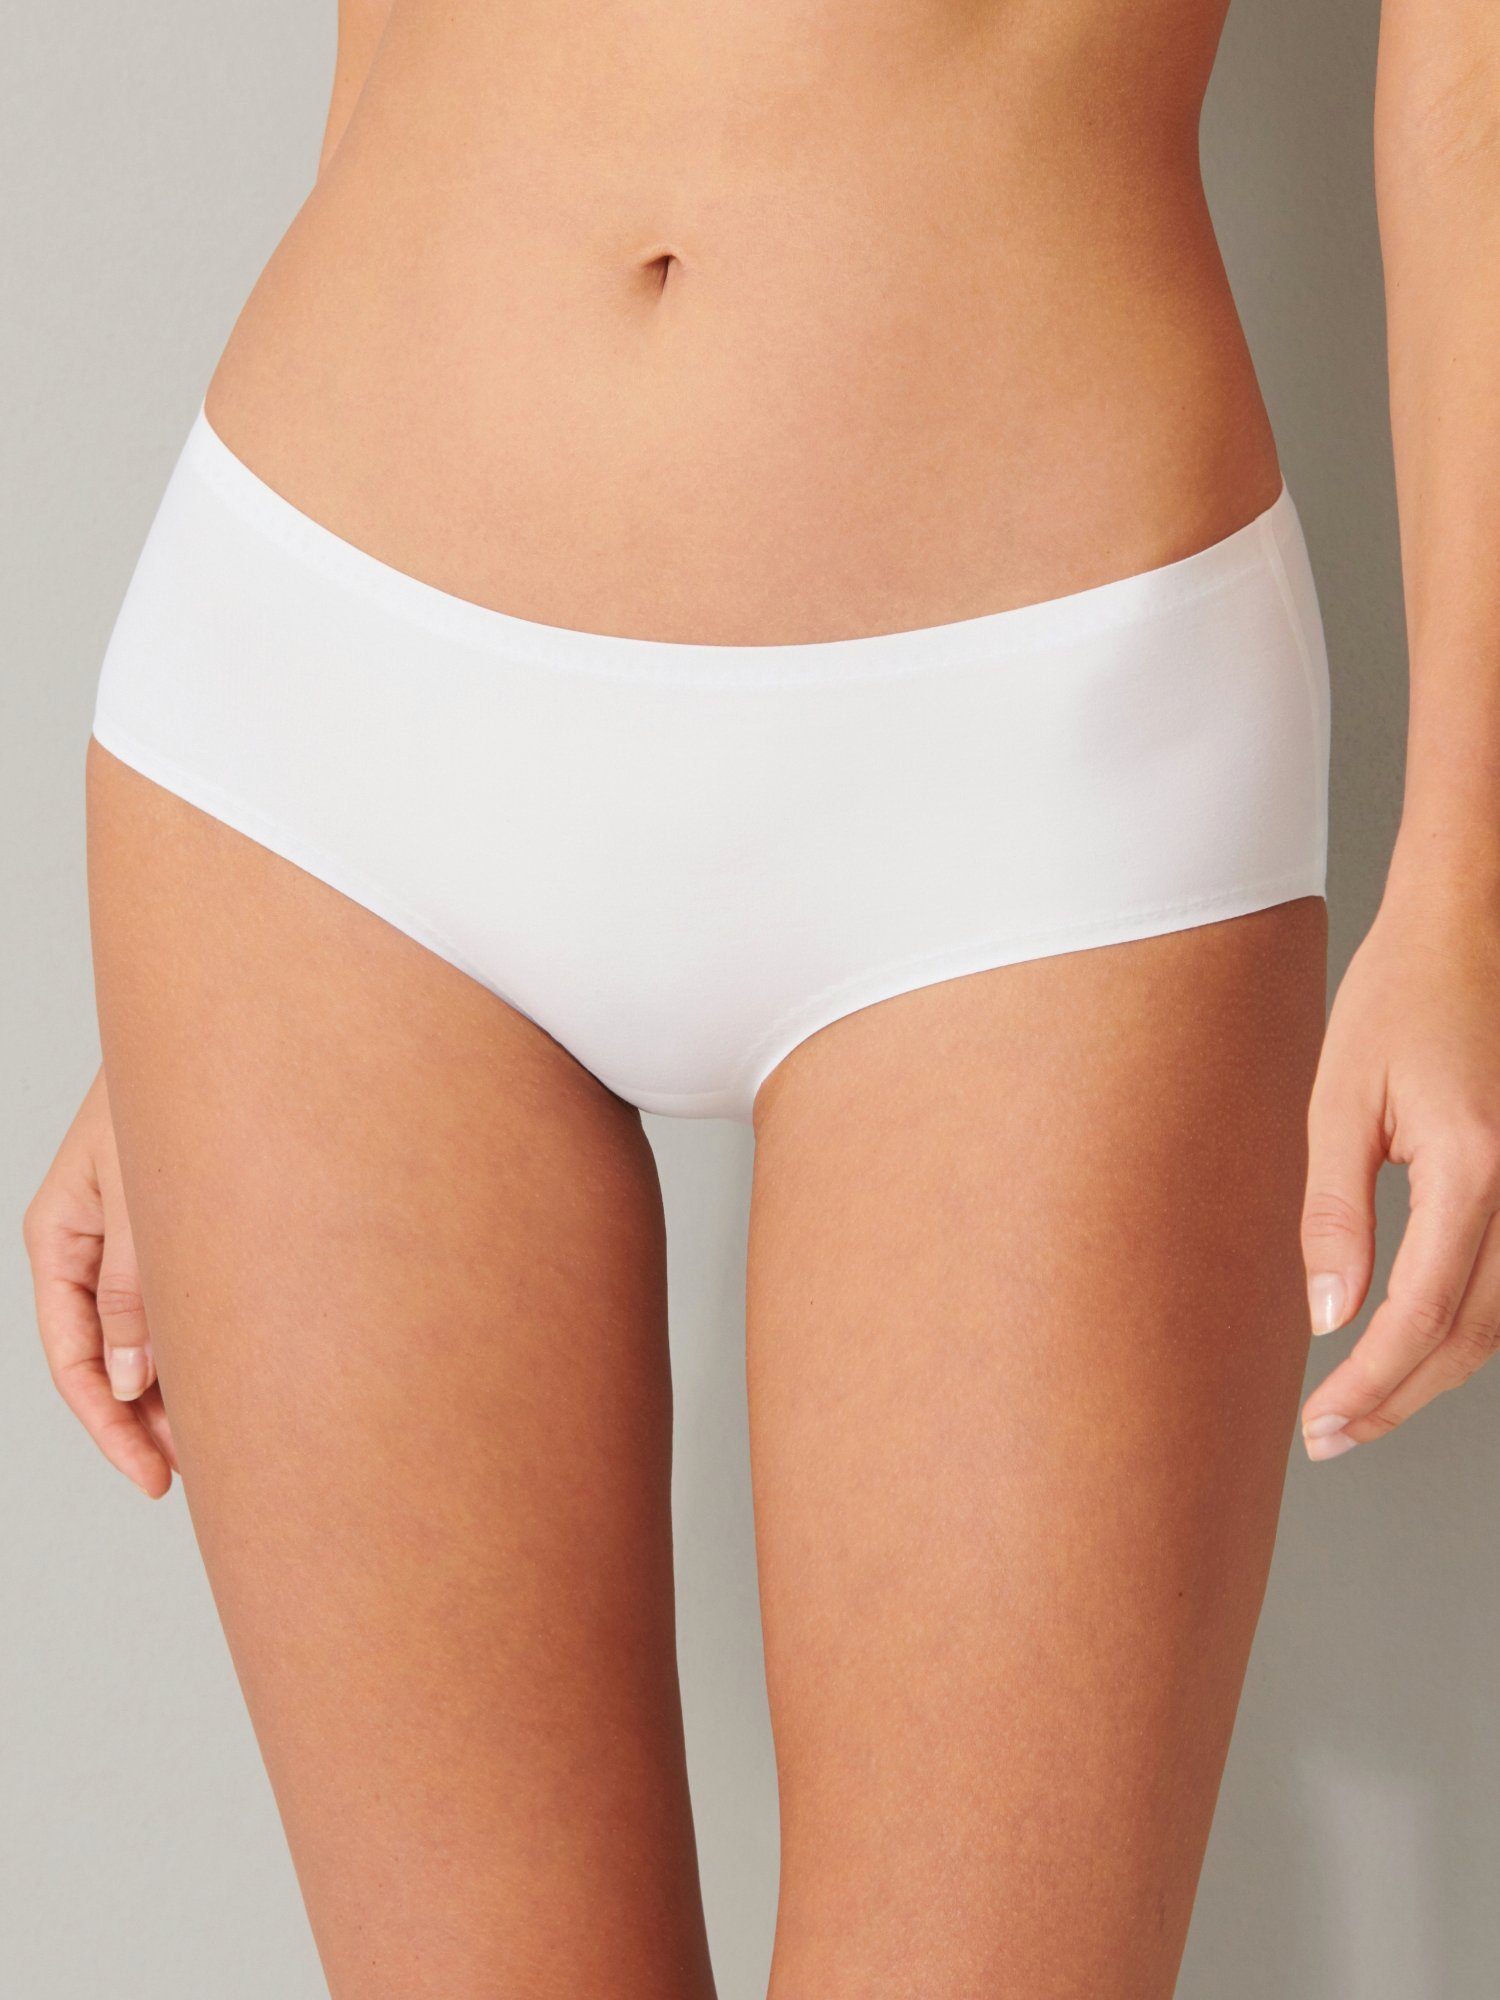 Soft Panty Schiesser weiss Invisible